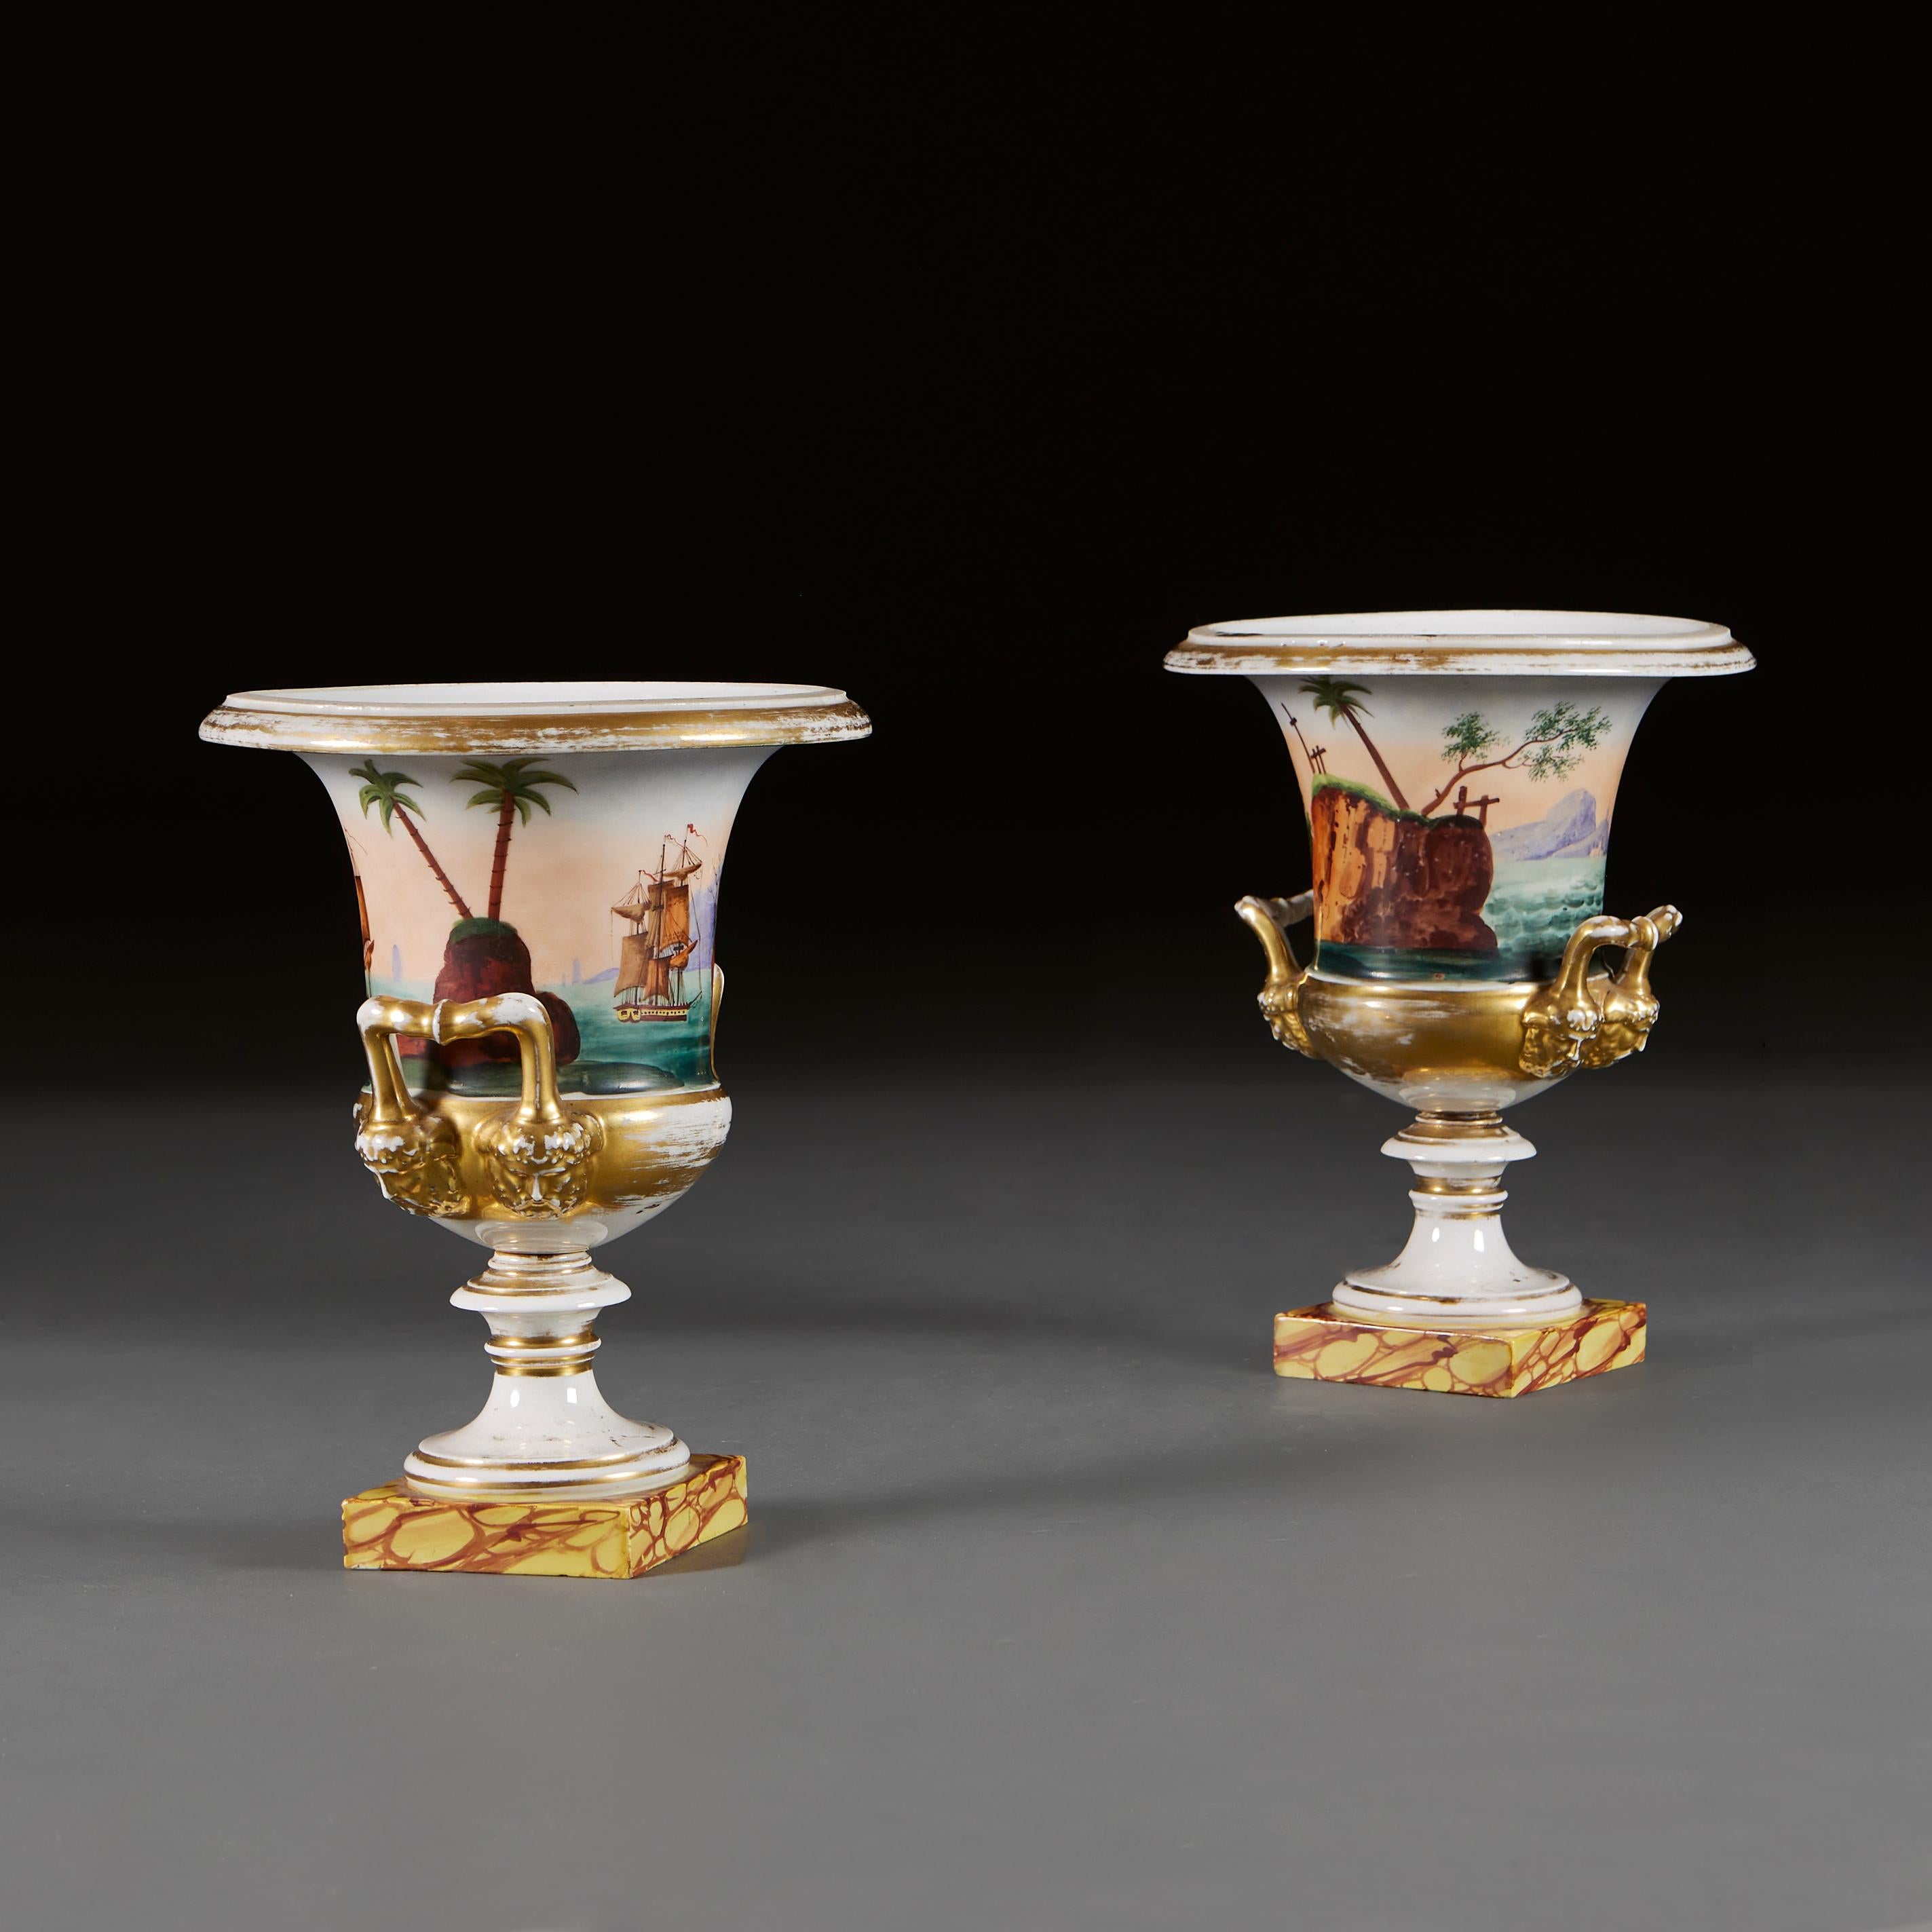 A Pair of 19th Century Paris Porcelain Urns  In Good Condition For Sale In London, GB